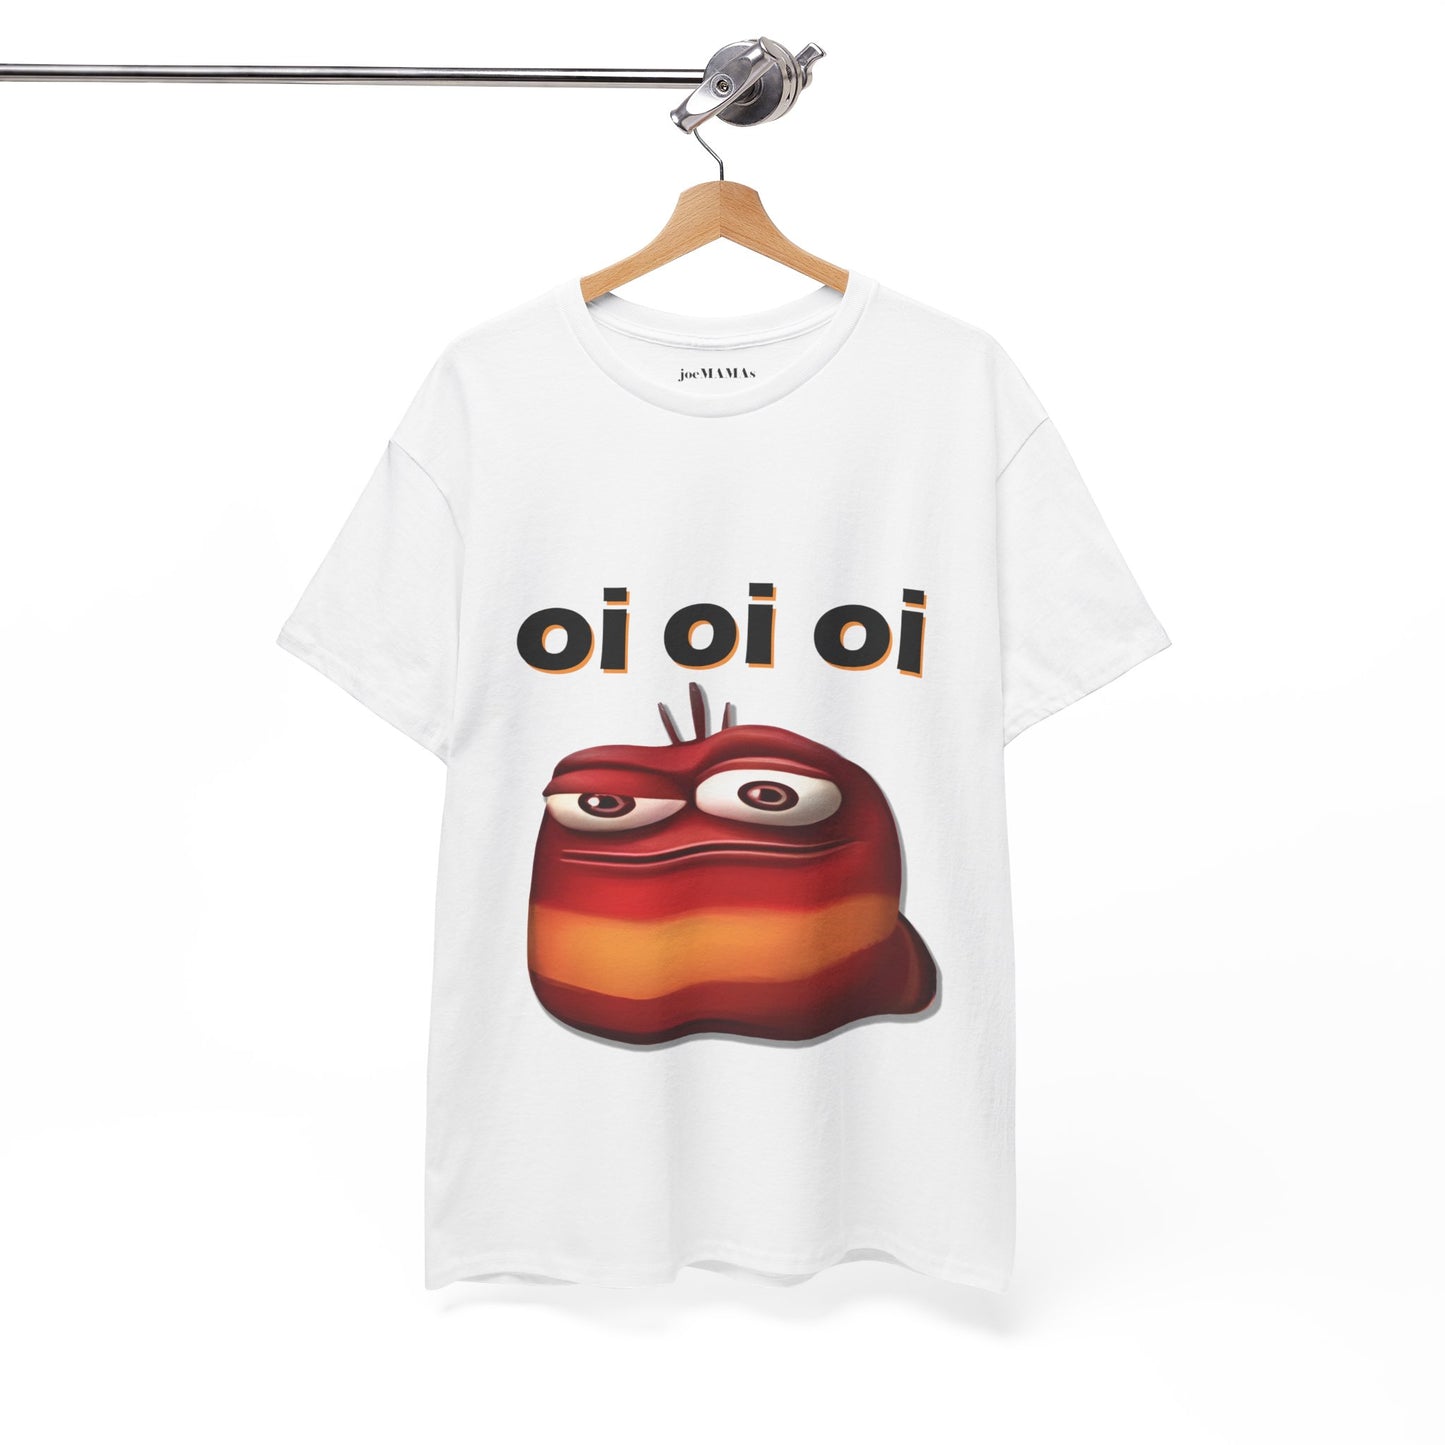 oh, oh, oh, T-Shirt